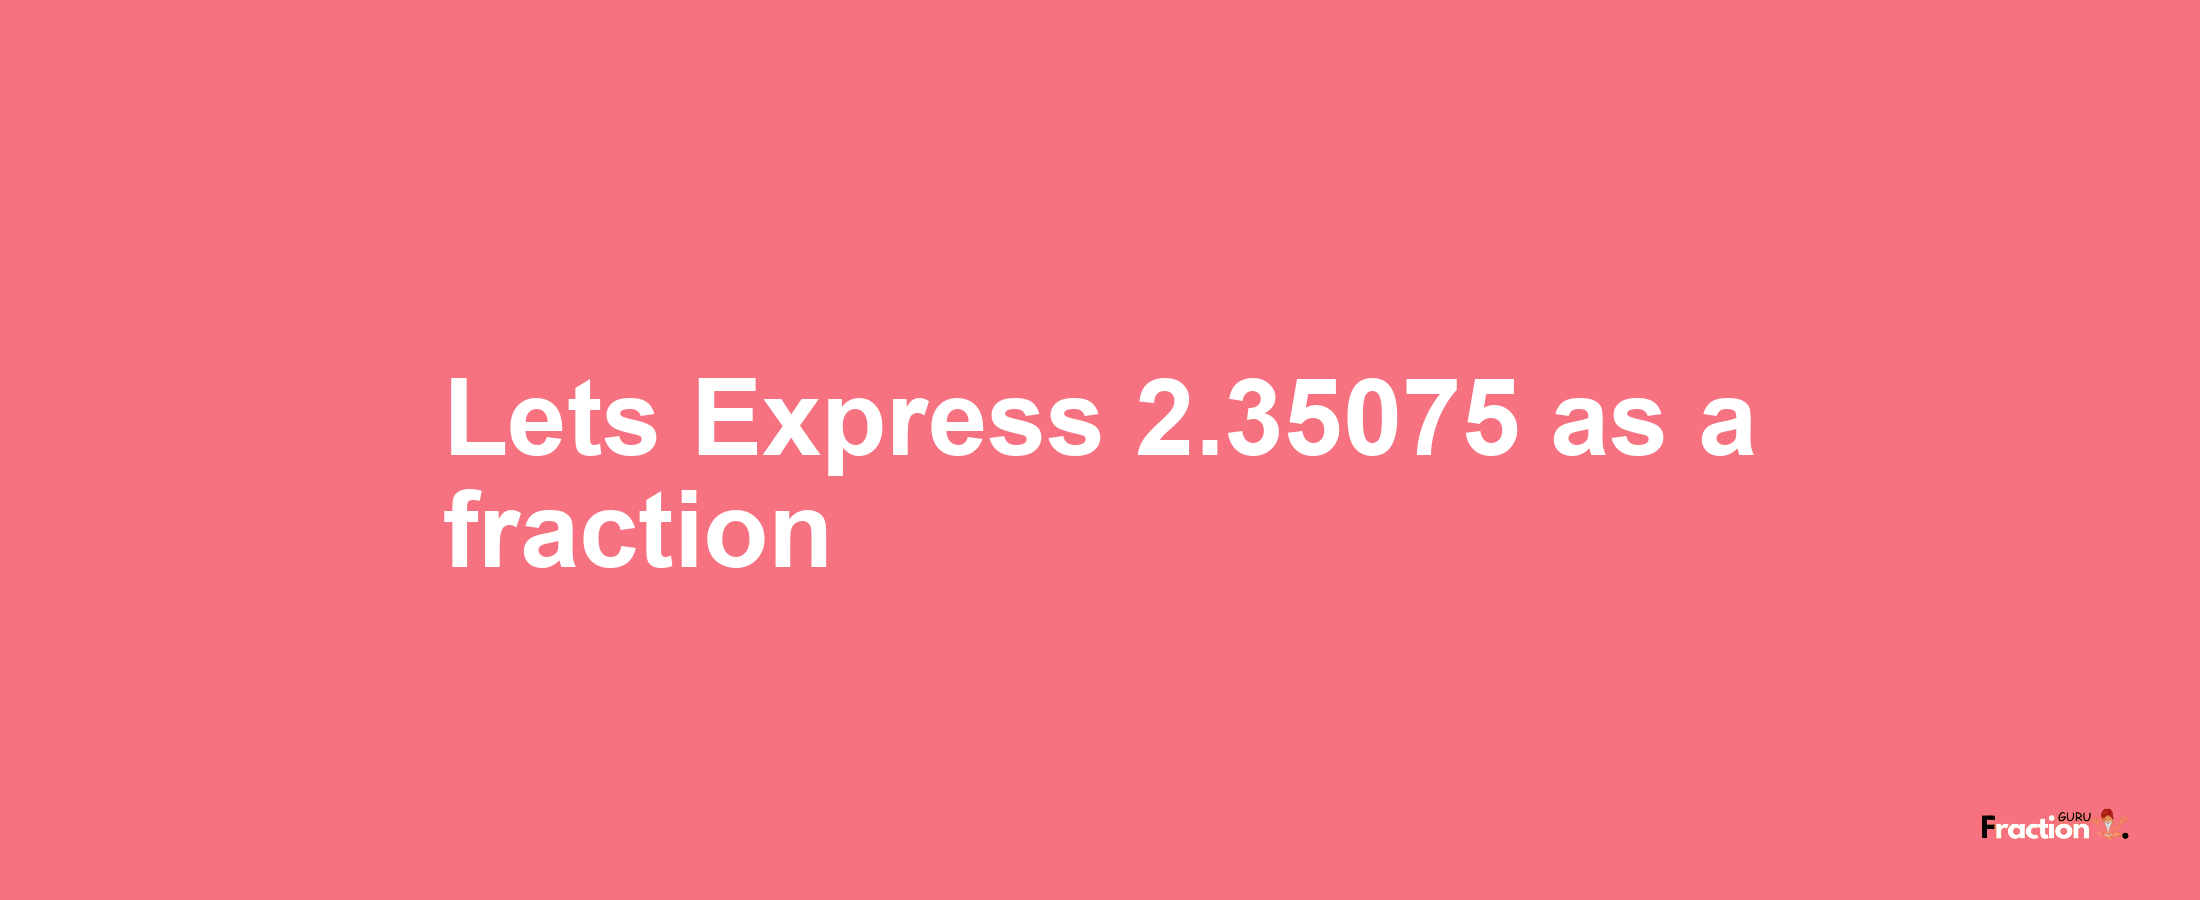 Lets Express 2.35075 as afraction